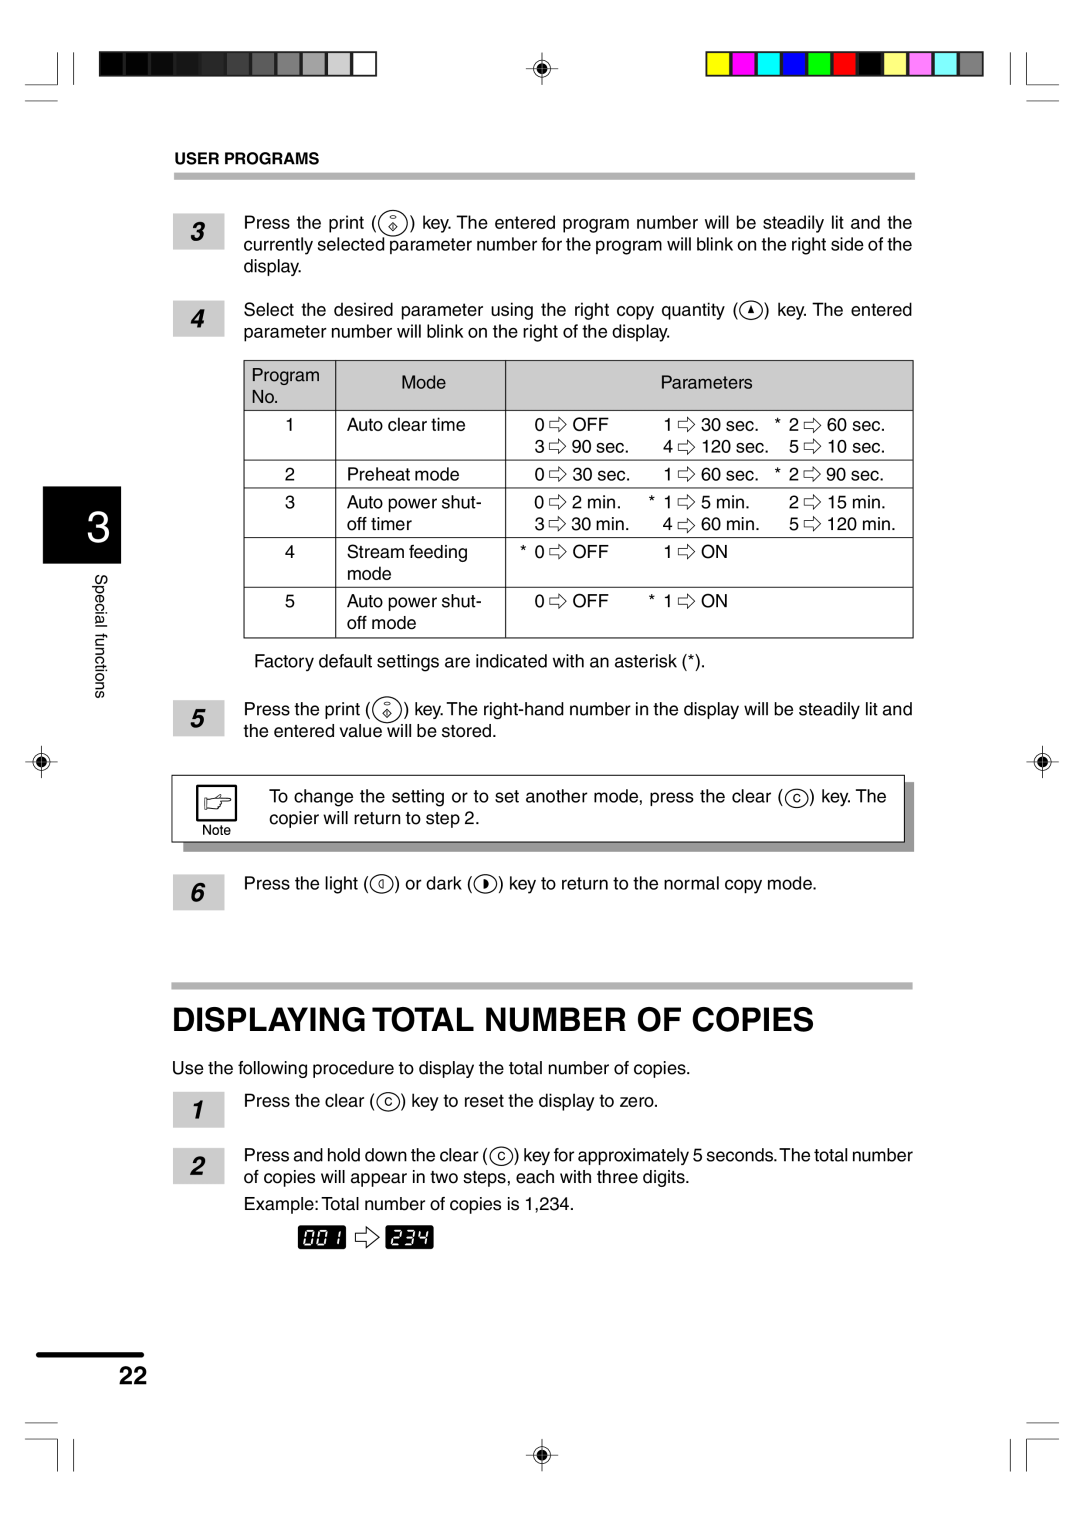 Sharp AR-F152 operation manual Displaying Total Number Of Copies, User Programs 